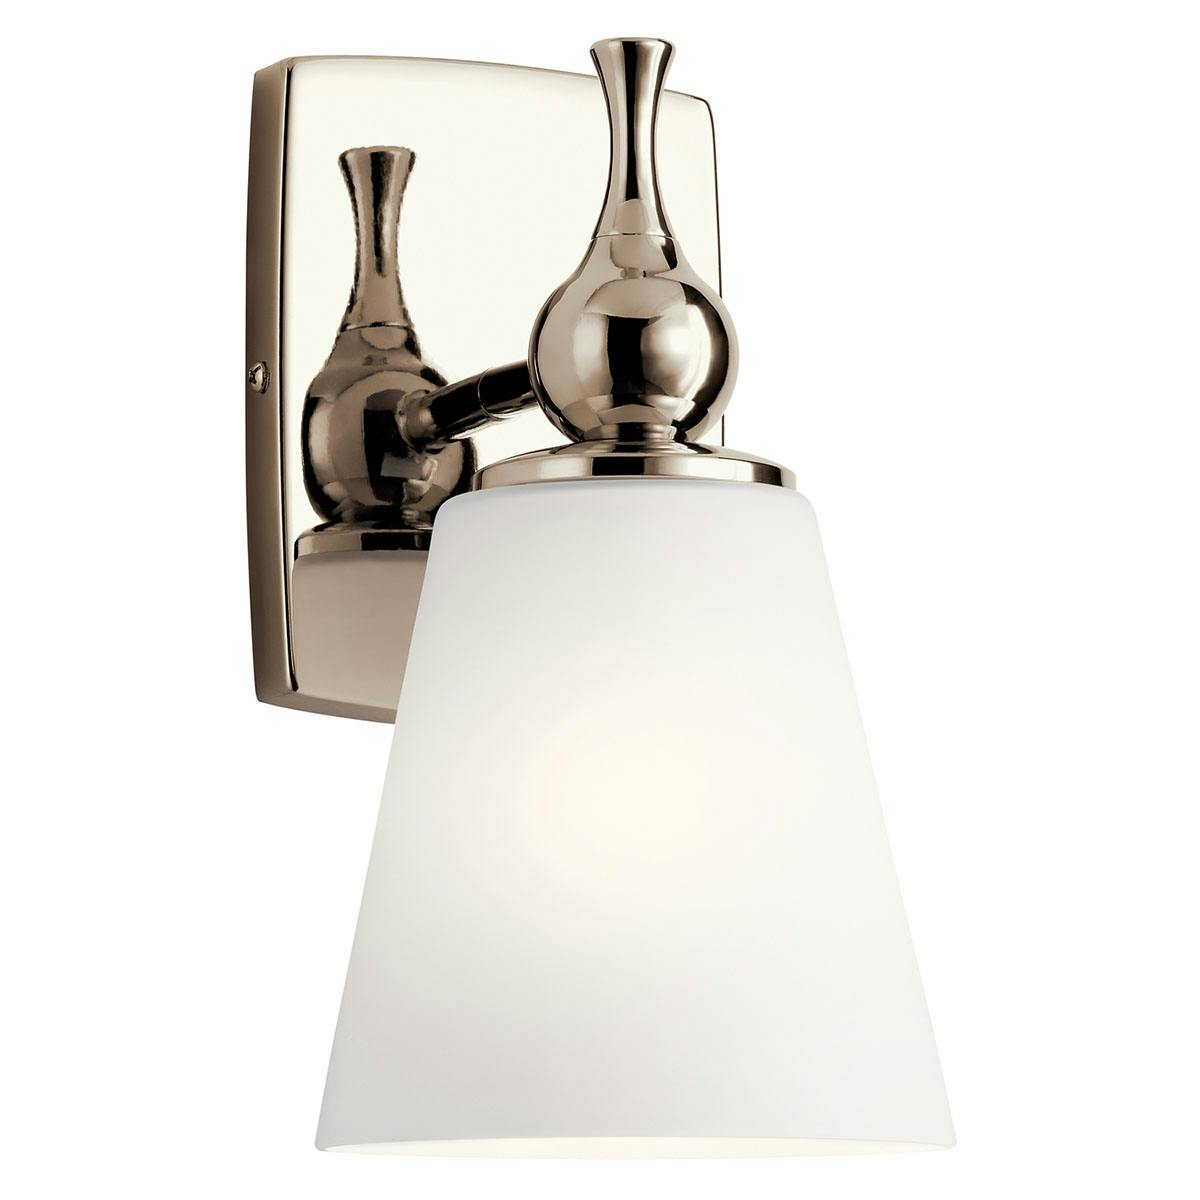 Cosabella 1 Light Sconce Polished Nickel on a white background